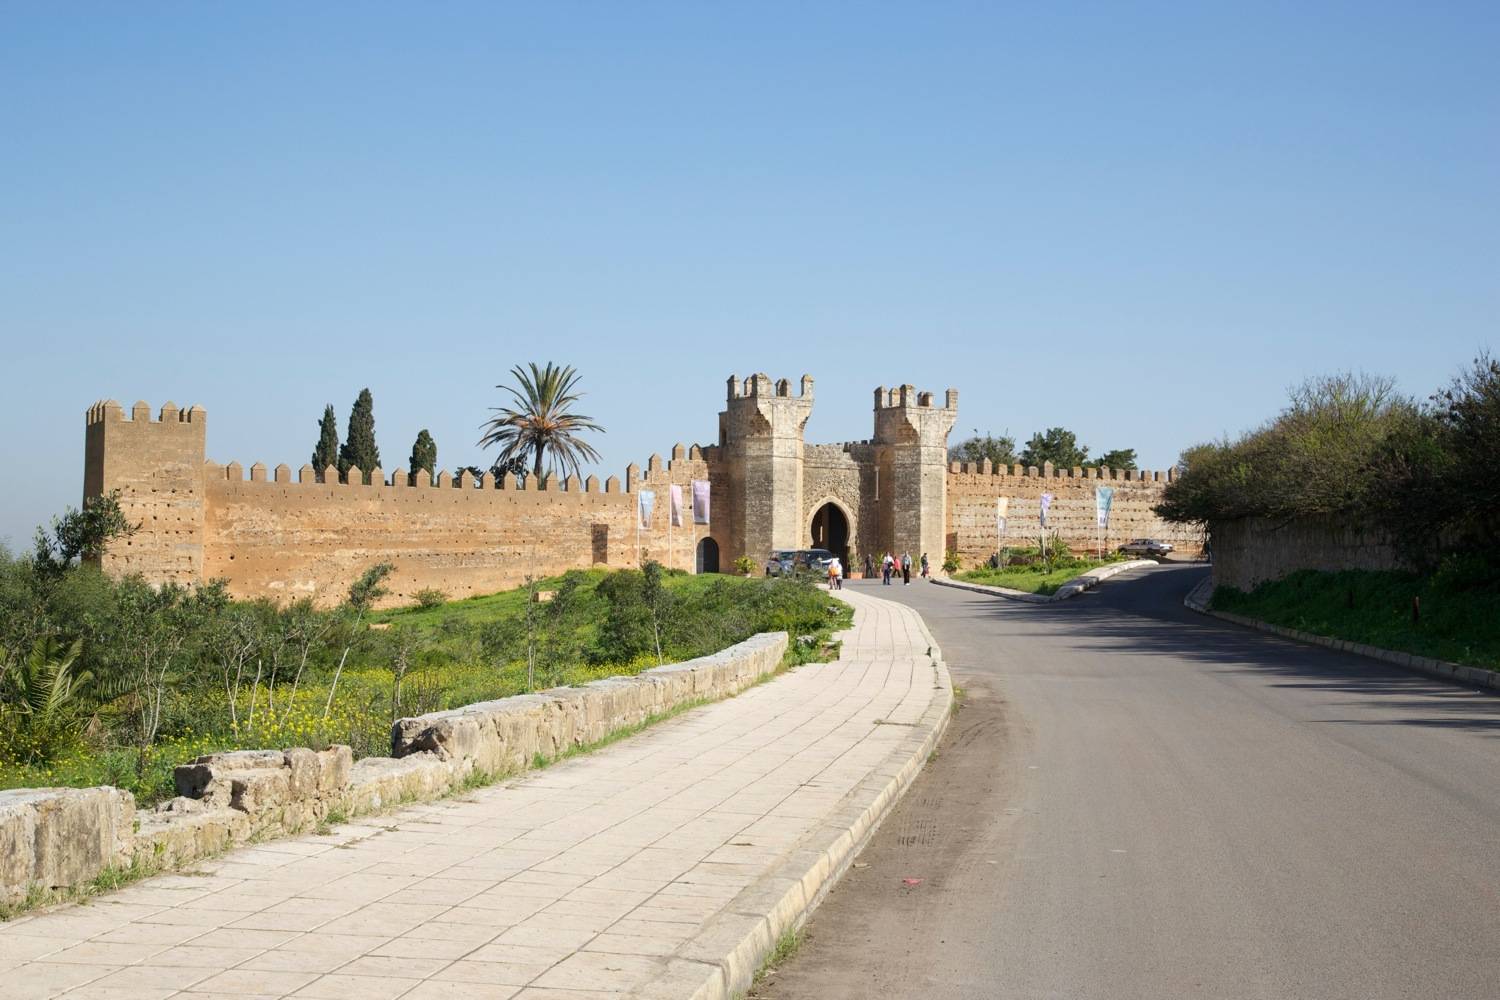 General view of Bab Chella or the main gate